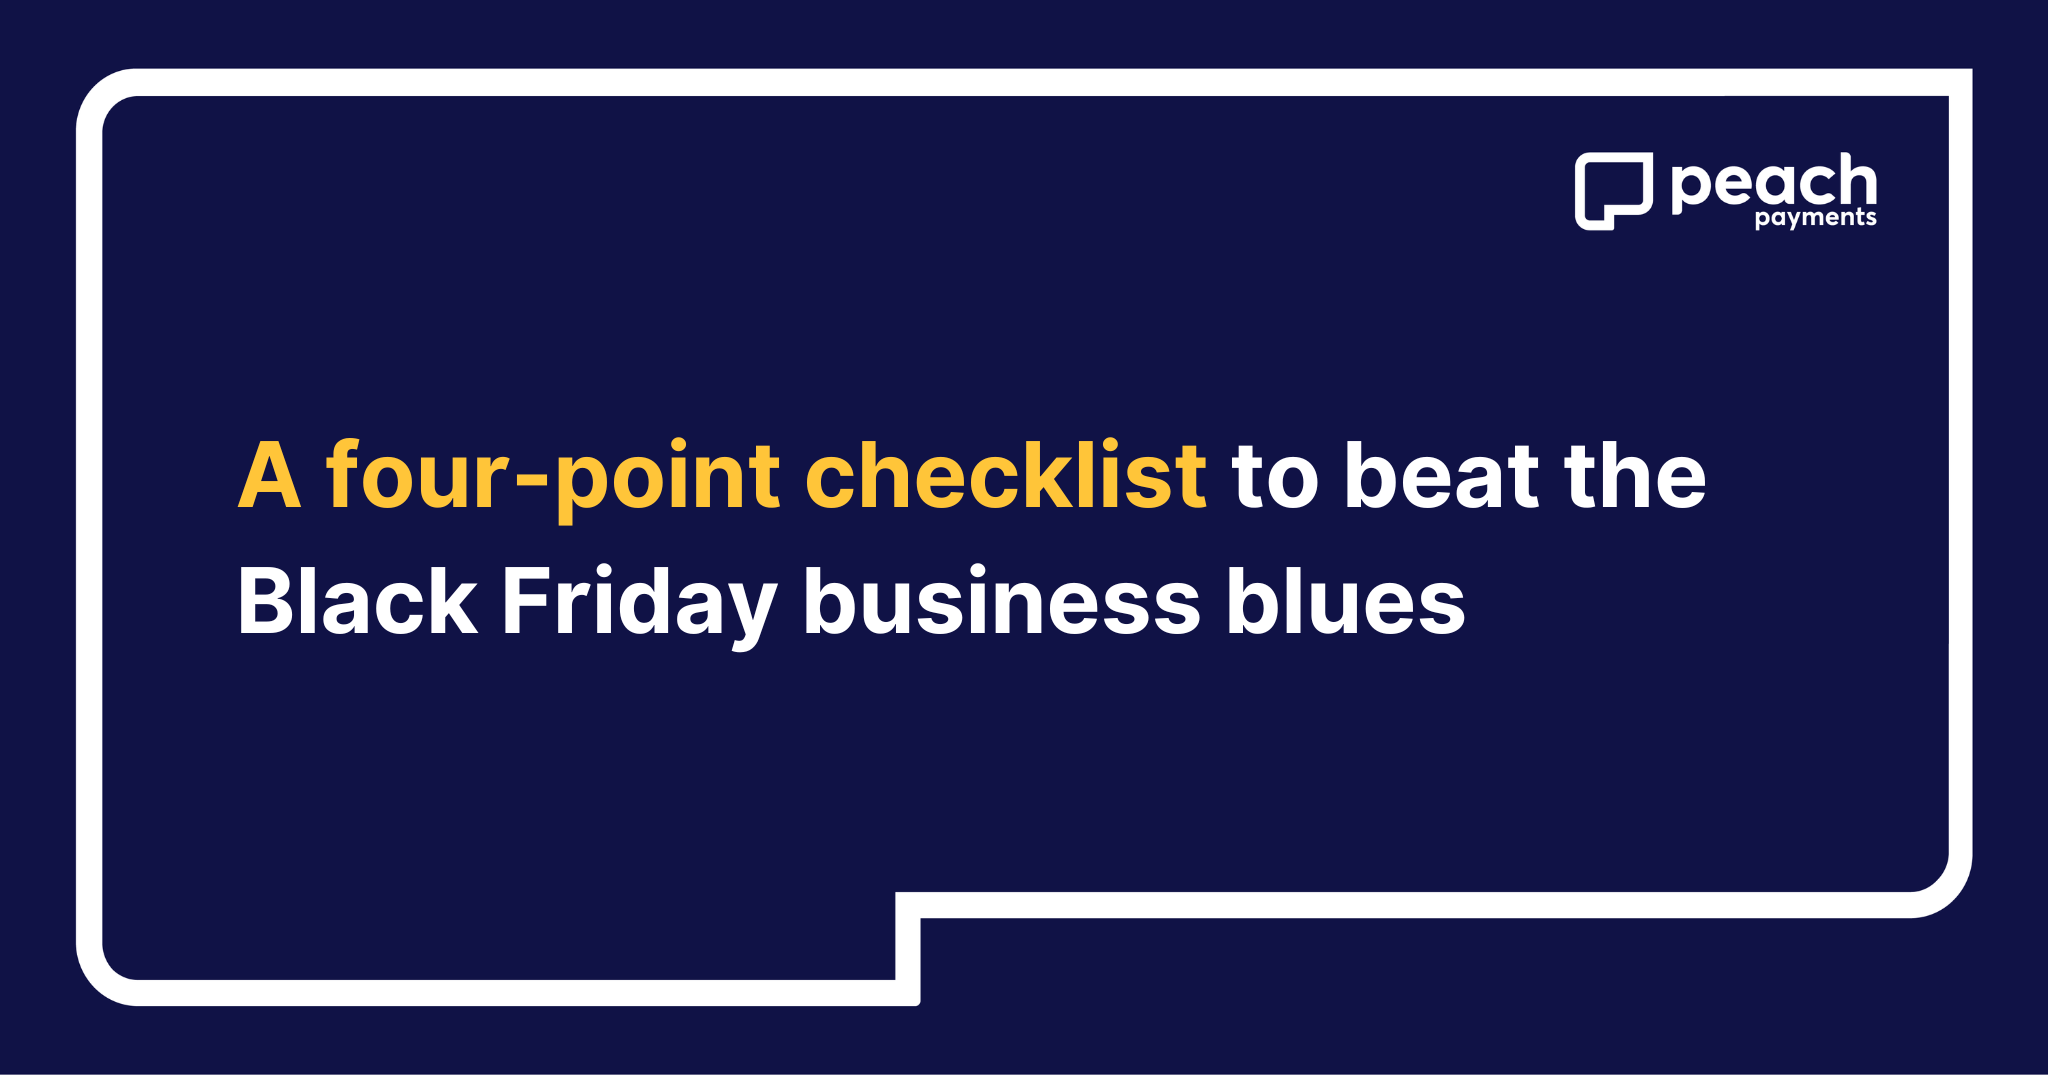 A four-point checklist to beat the Black Friday business blues